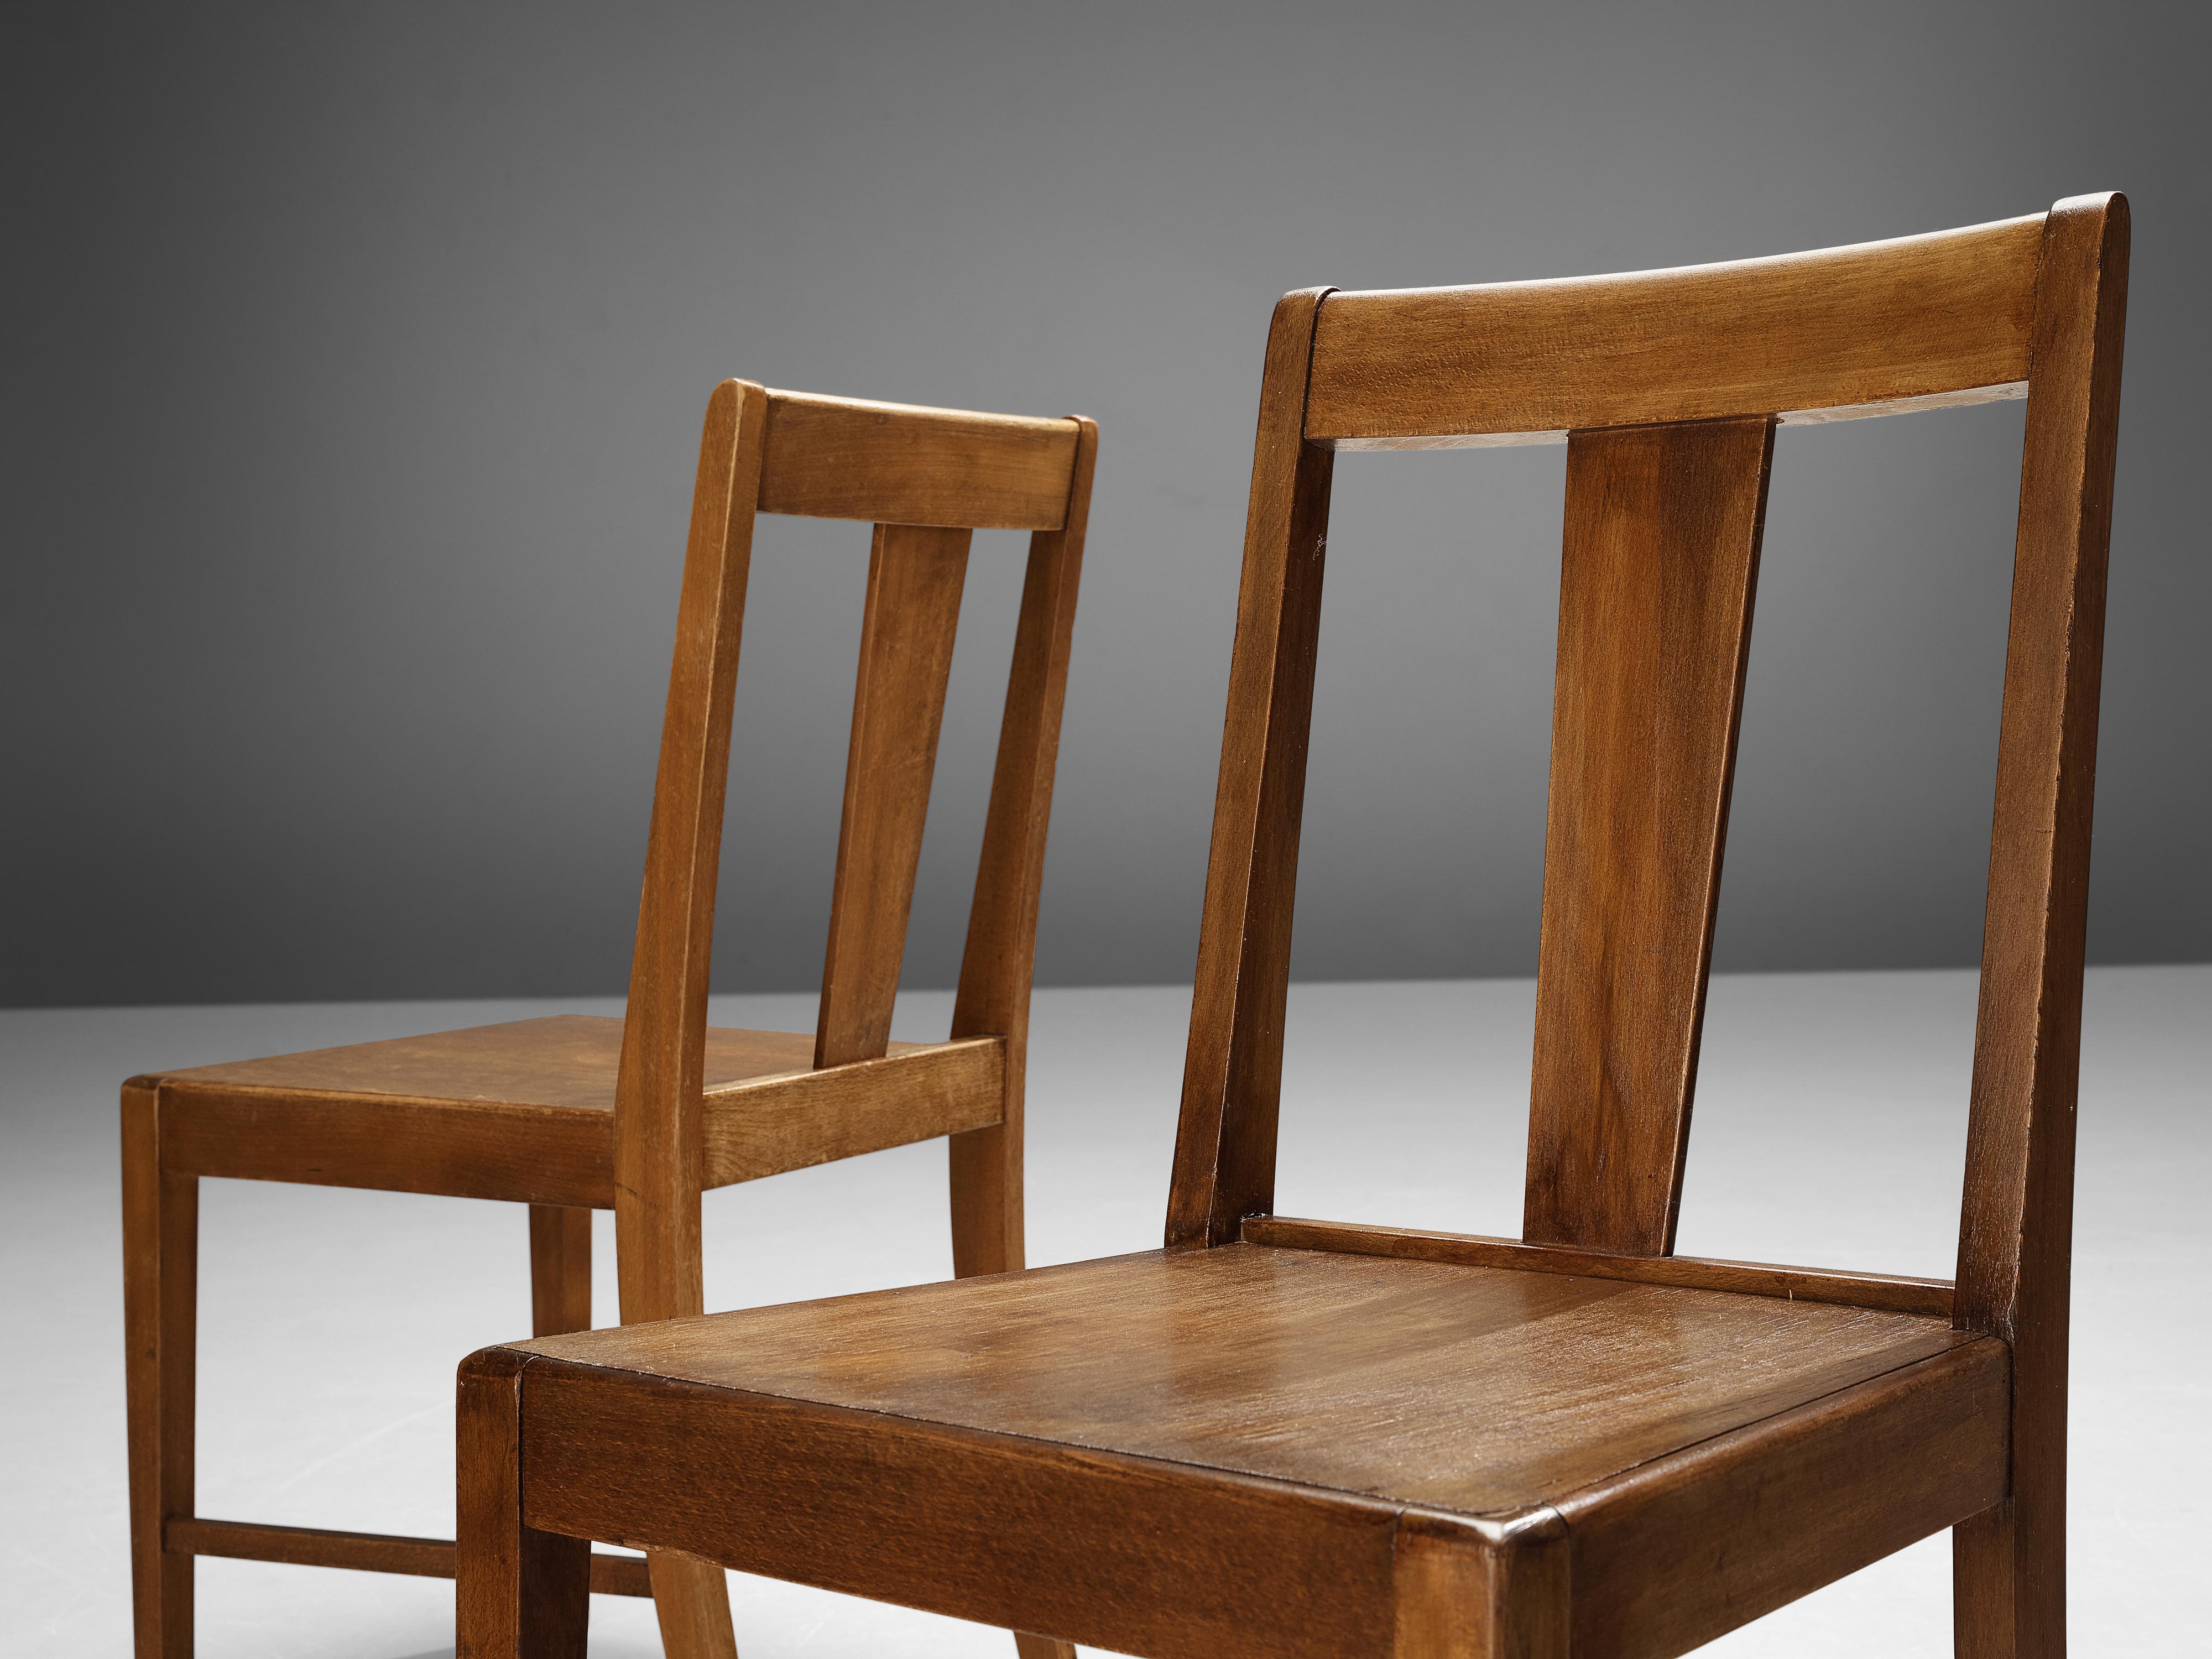 Dutch Dining Chairs in Wood